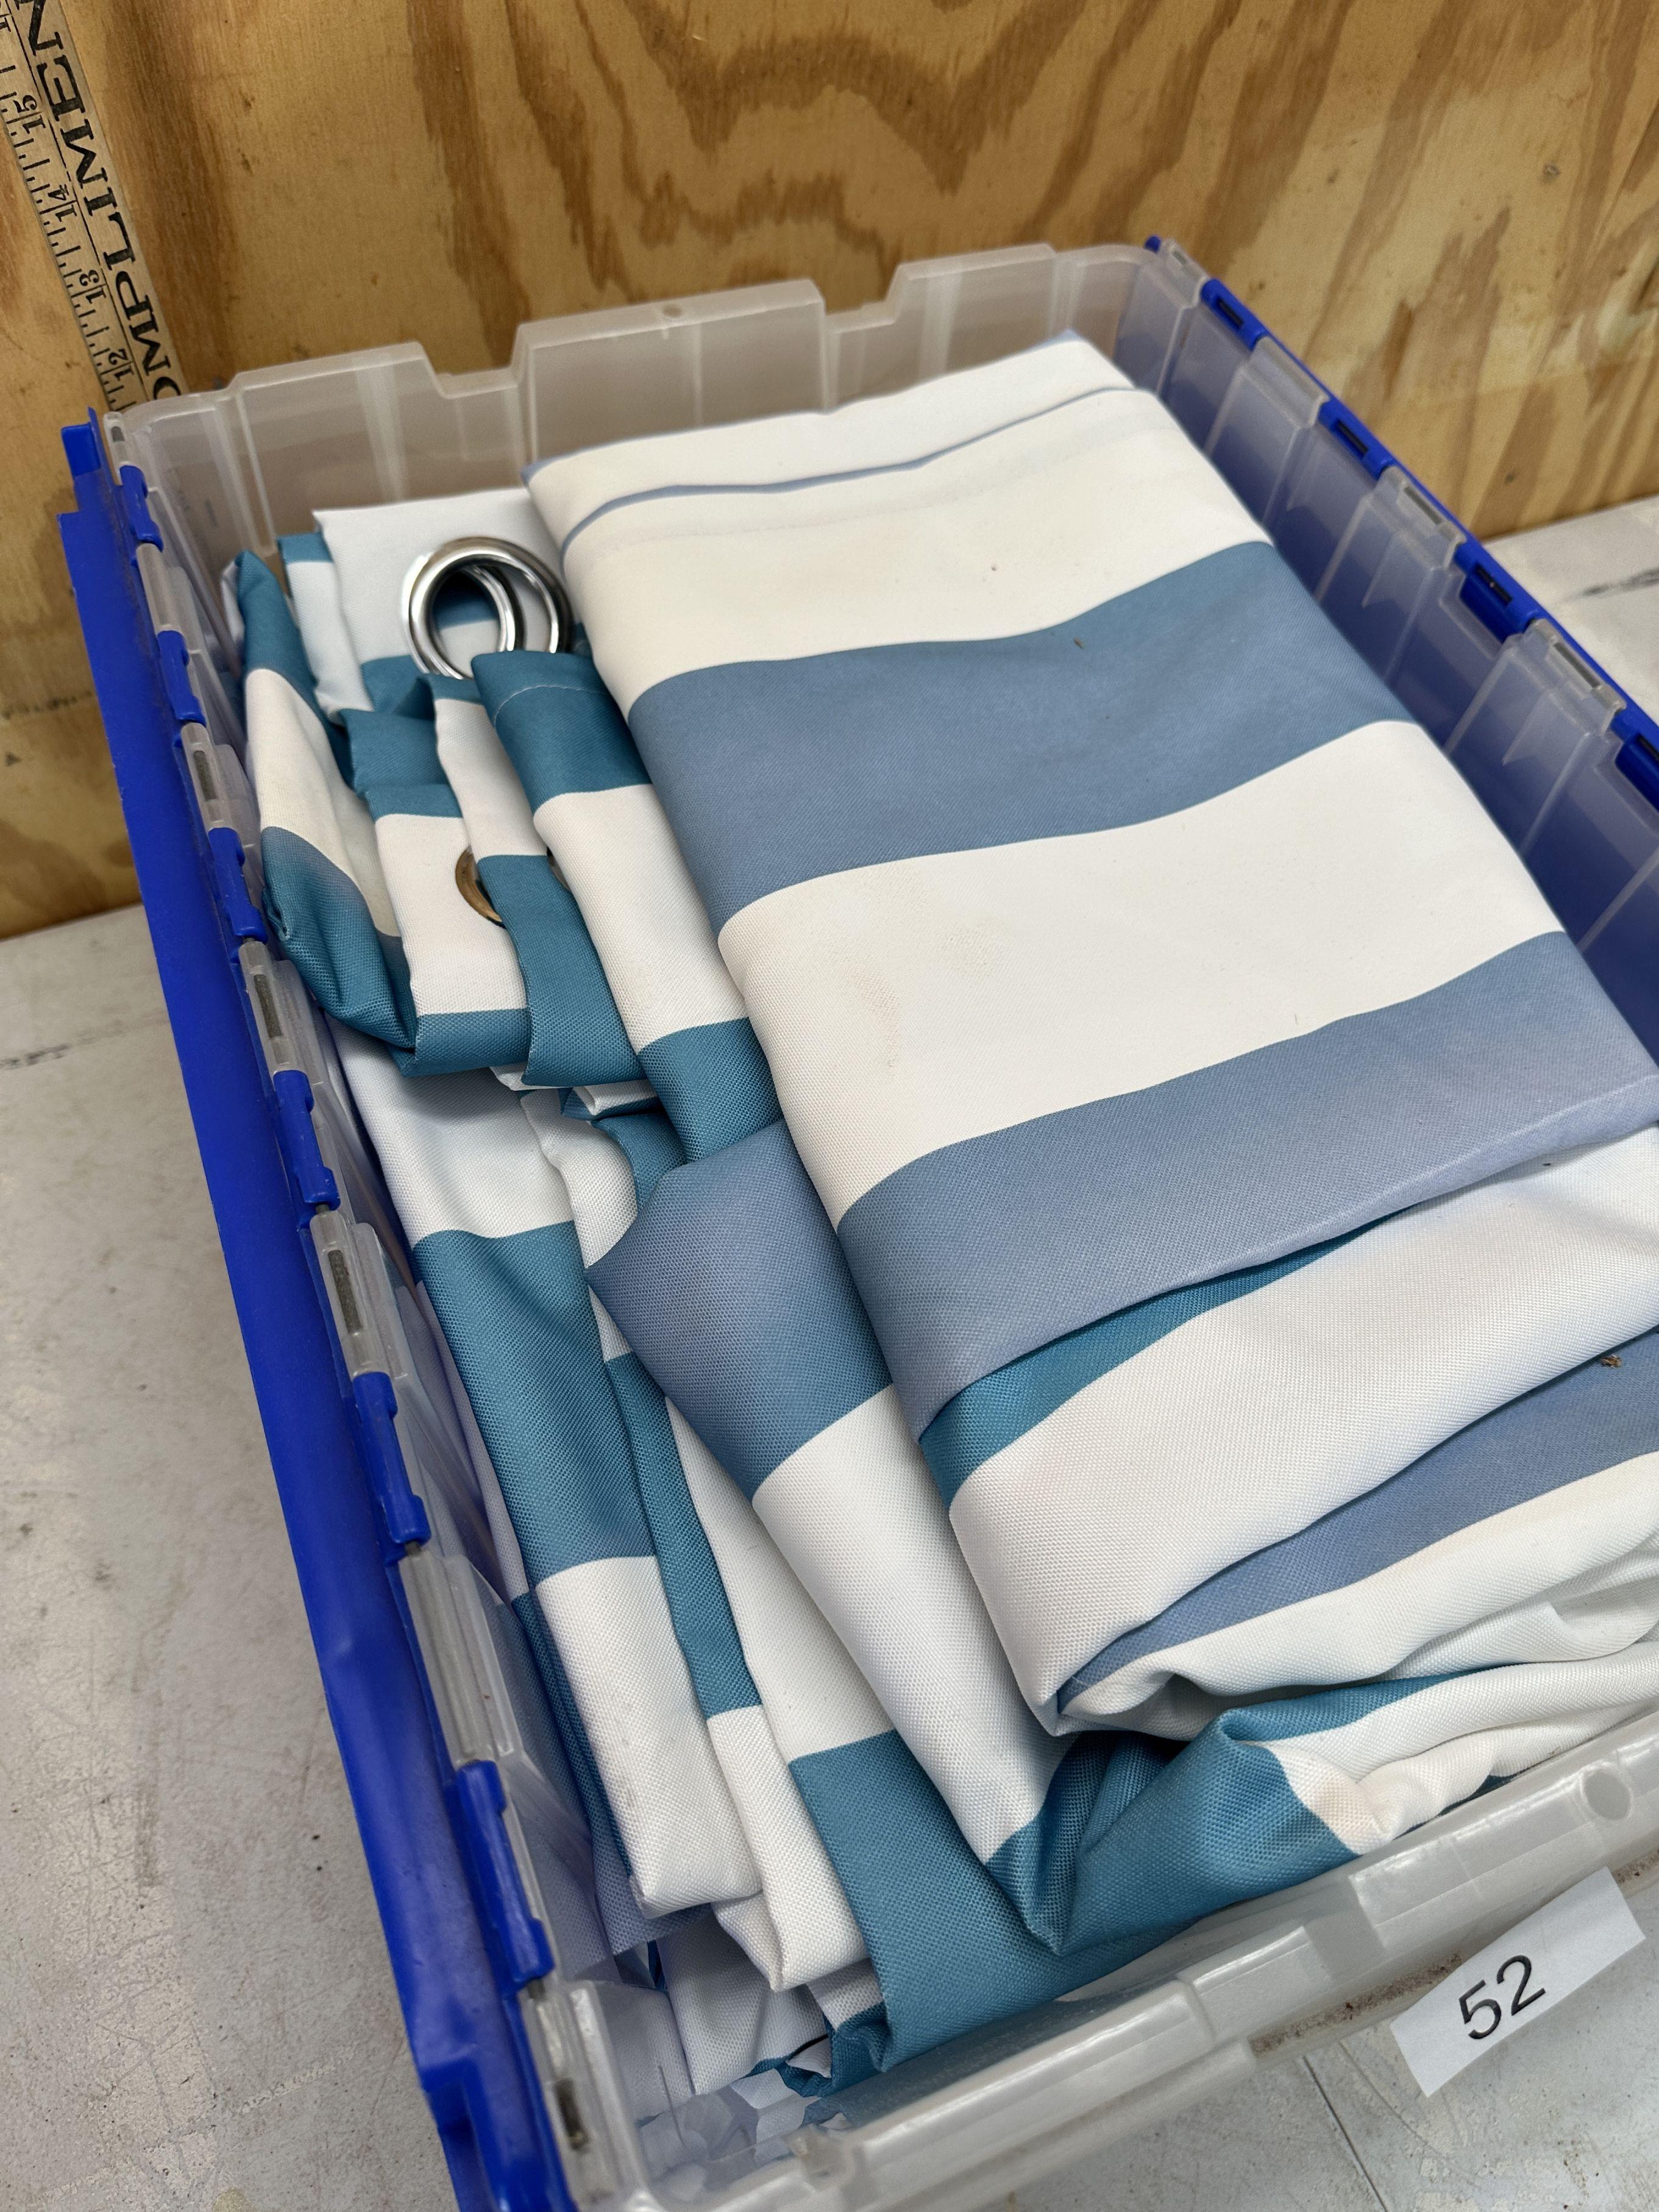 Fold Lid Tote Full/Outdoor Curtains (Says 7, Seems More Than 7)(Grommetted Panels)